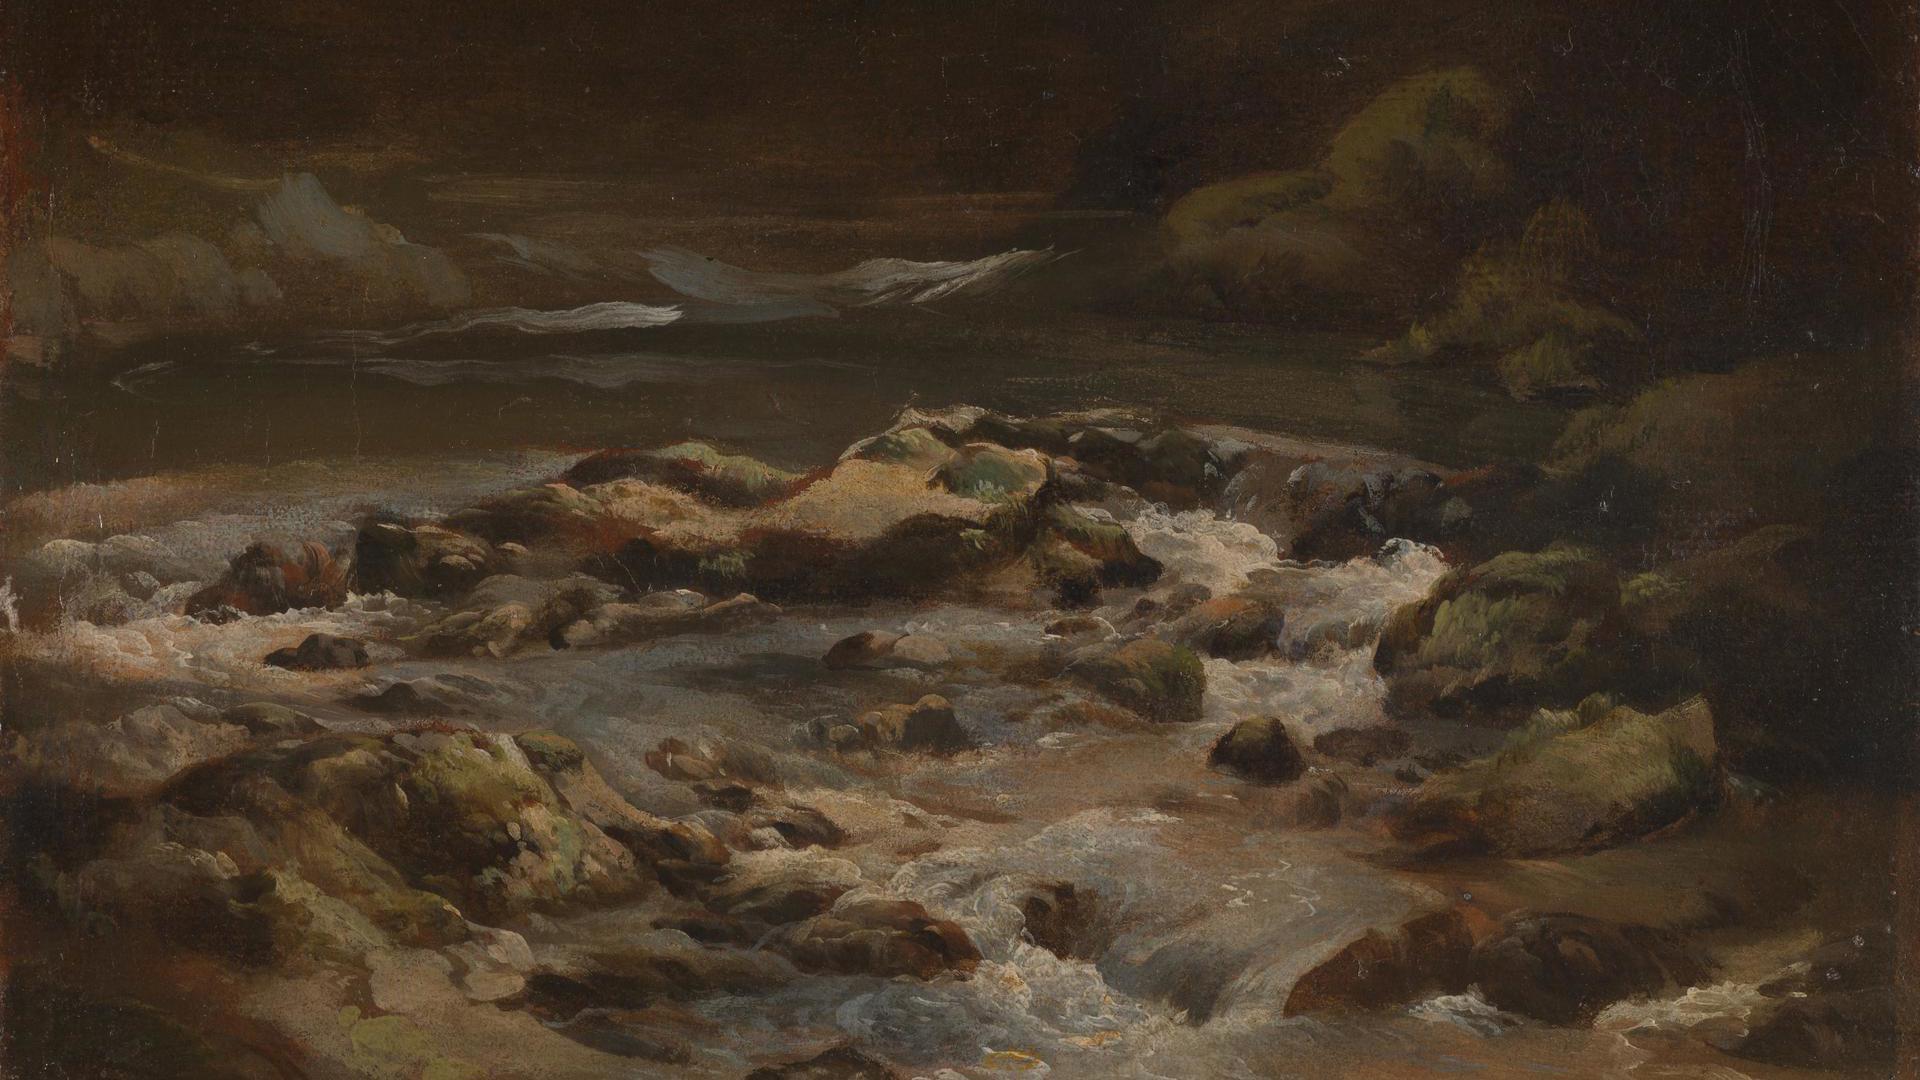 A Trout Stream by Philip Reinagle